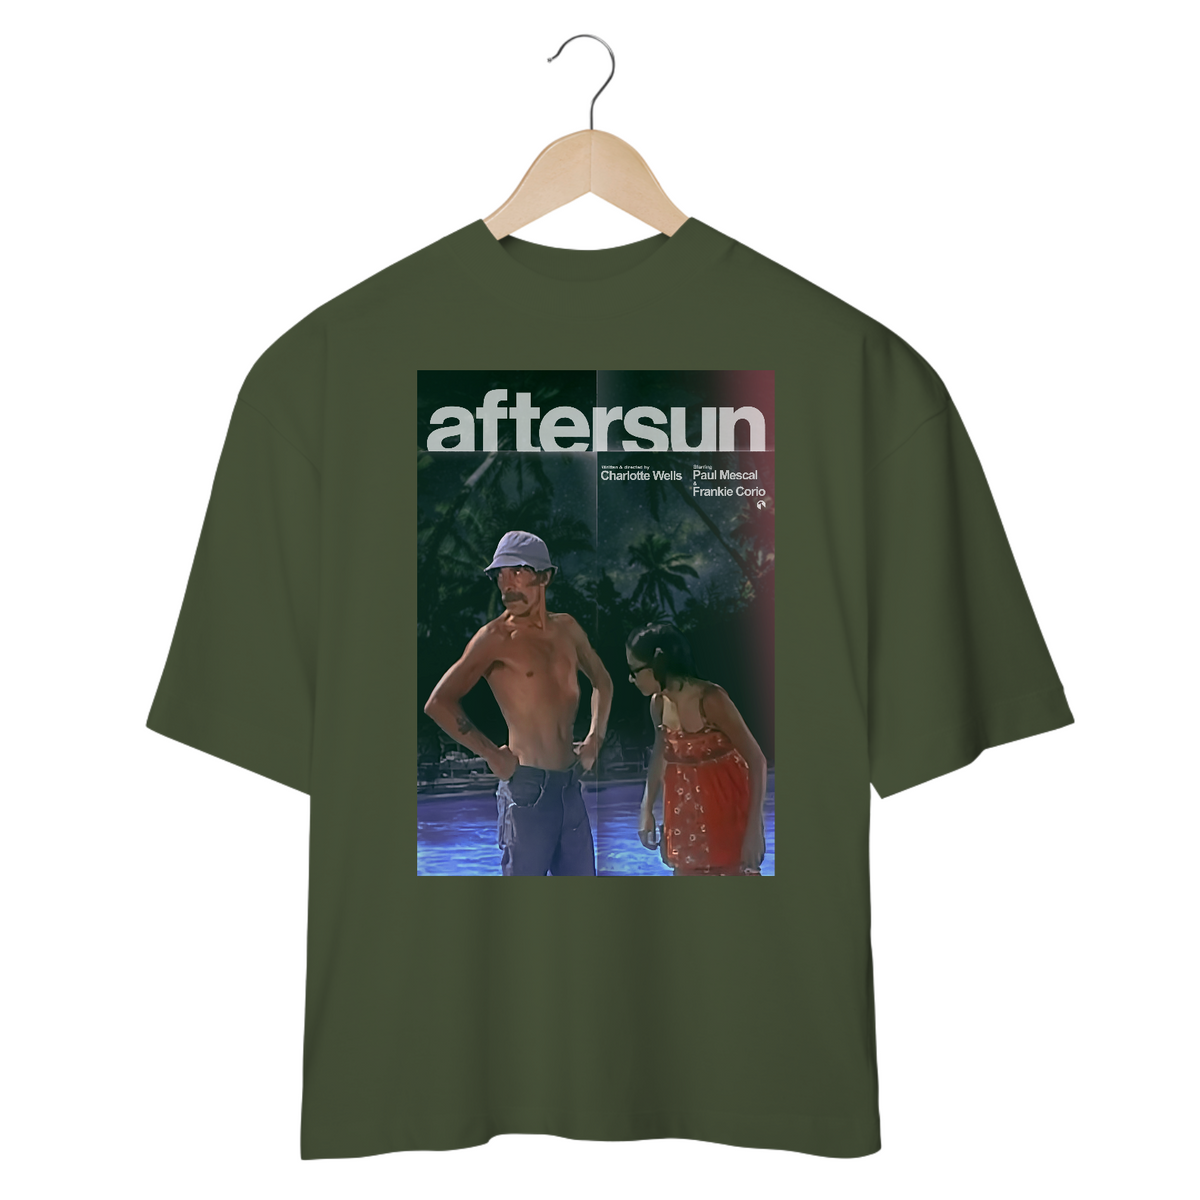 Nome do produto: Oversized - Aftersun in Acapulco